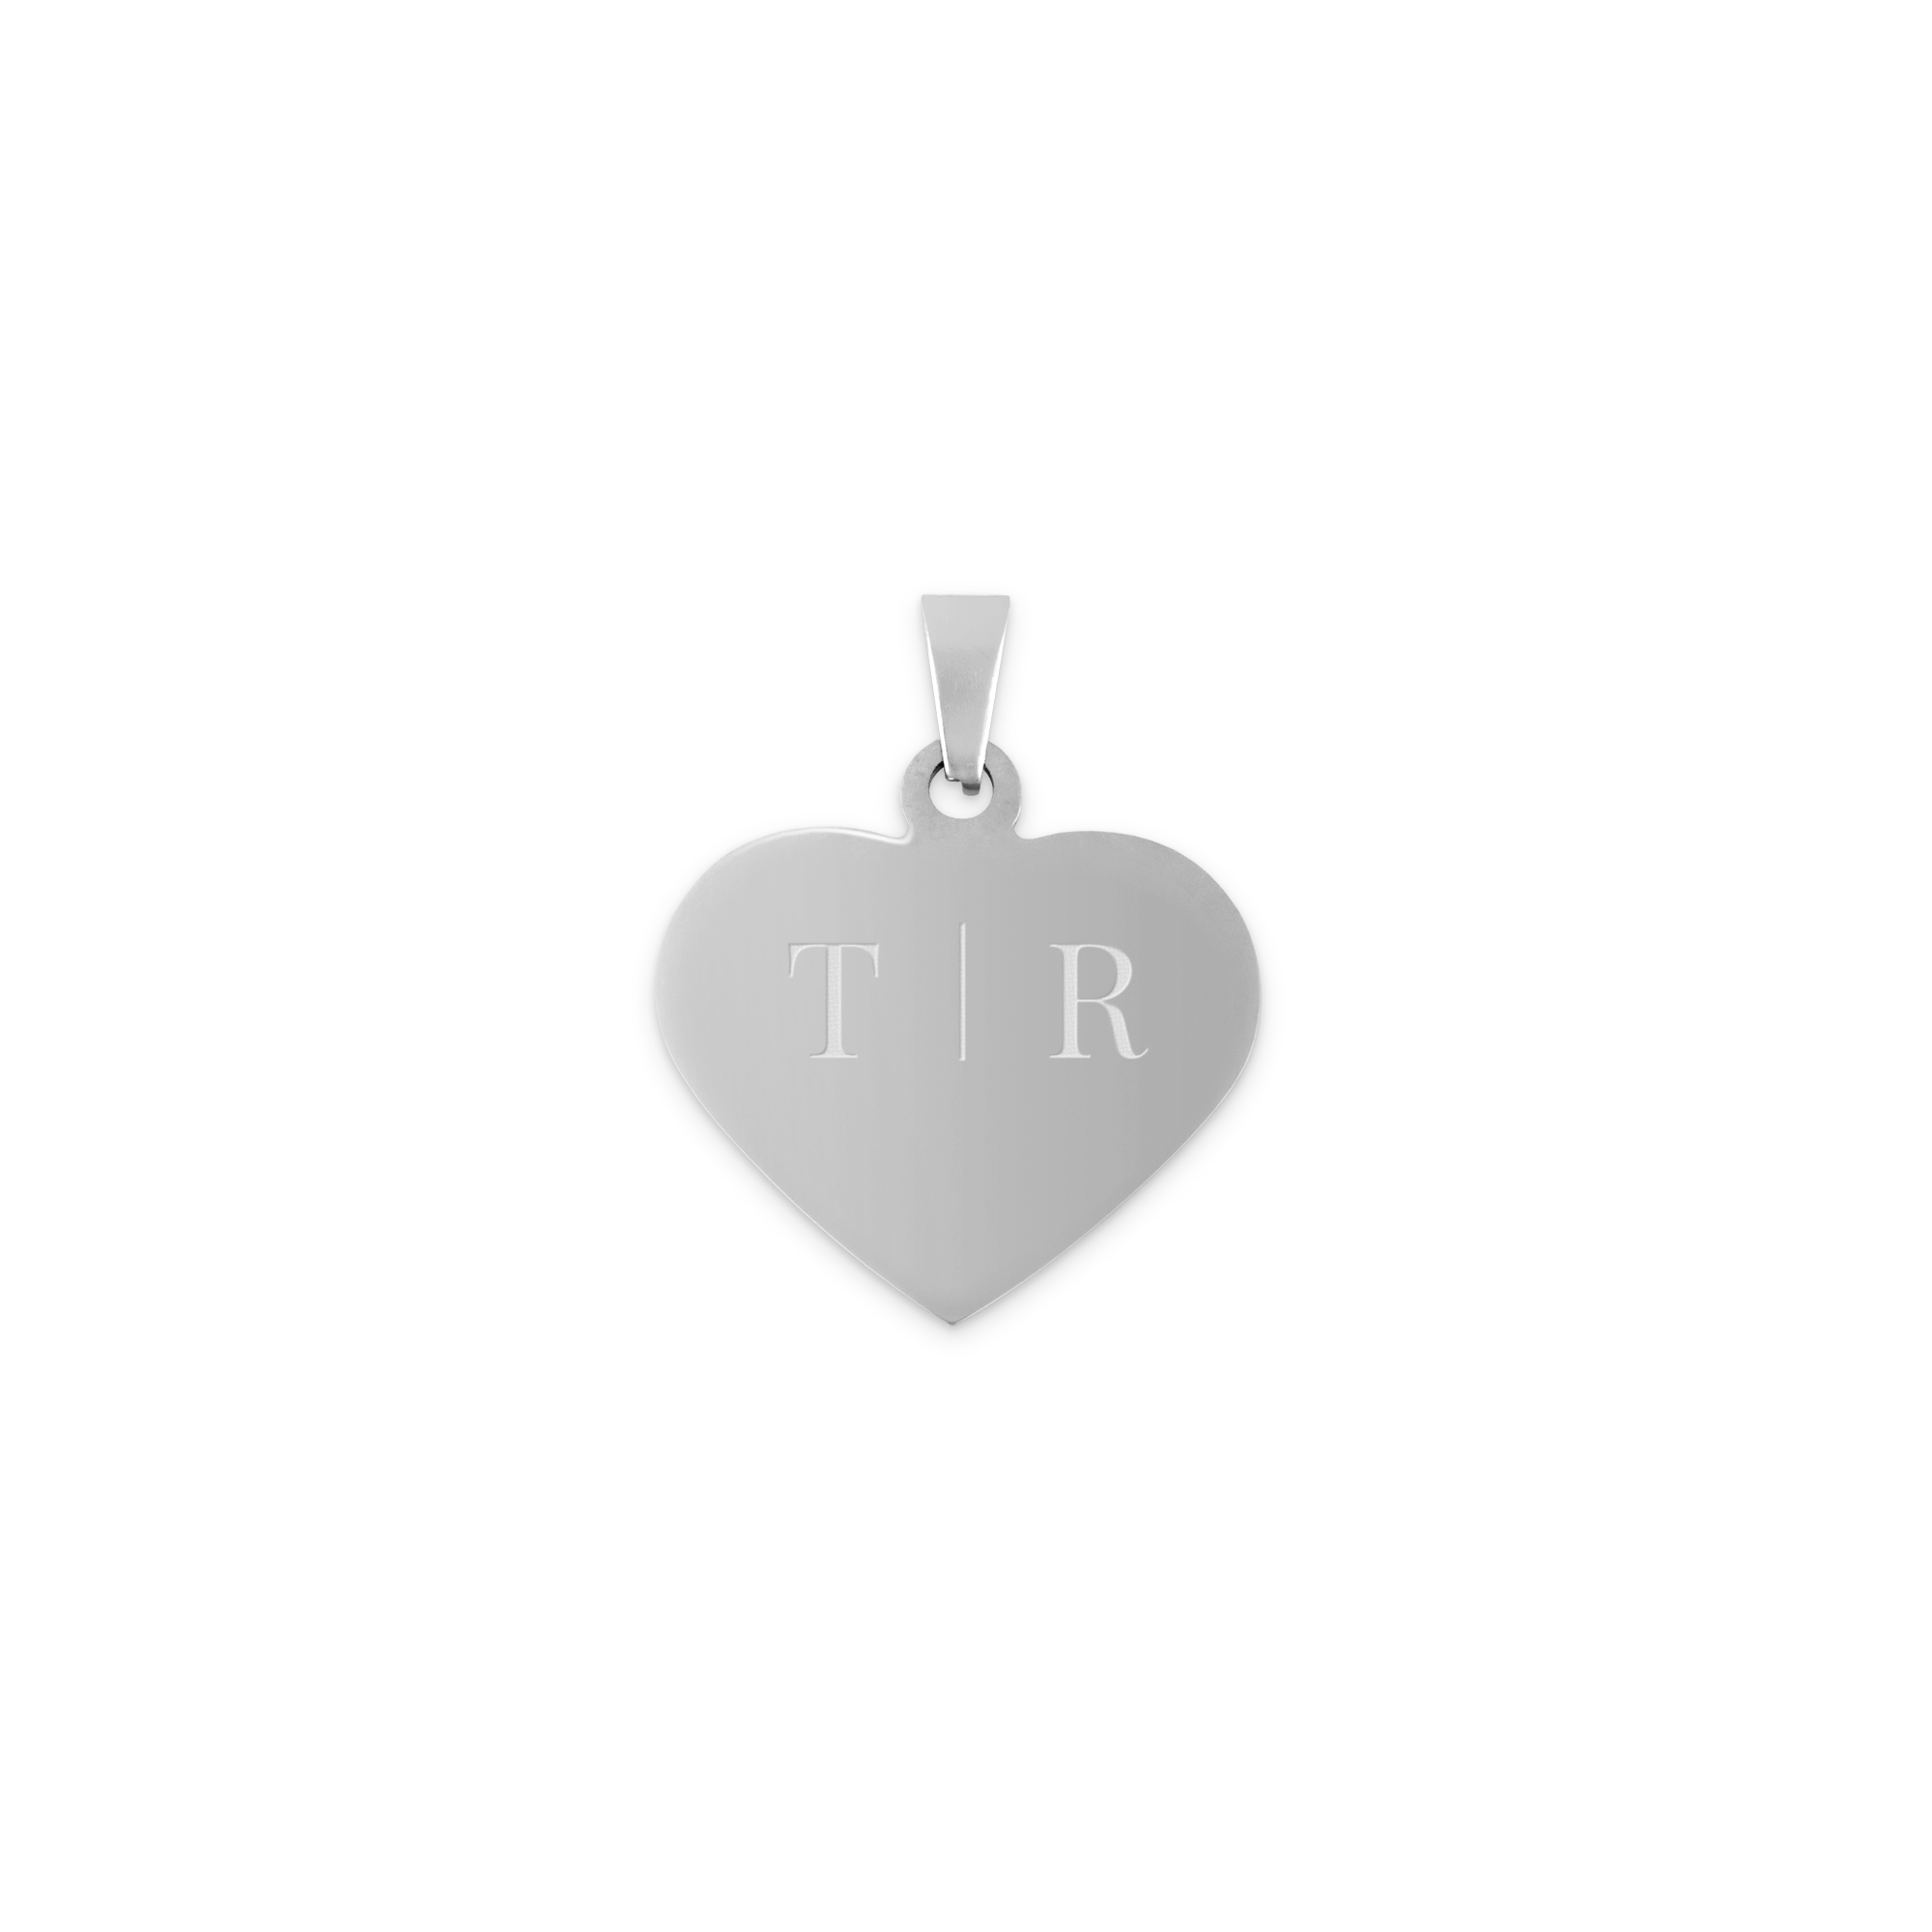 Engraved heart necklace